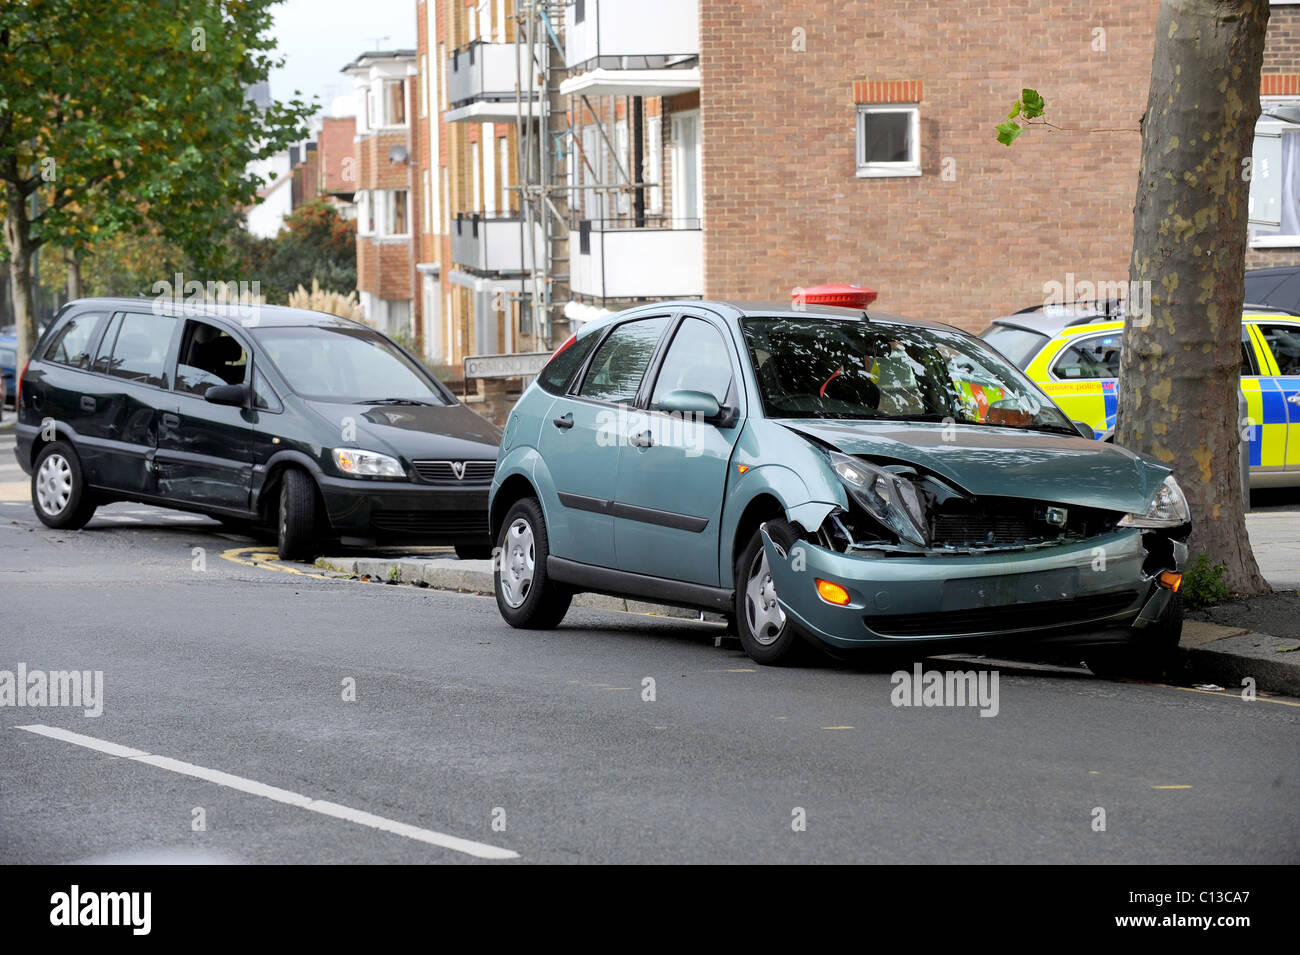 Two cars damaged at the side of the road after a small accident Stock Photo